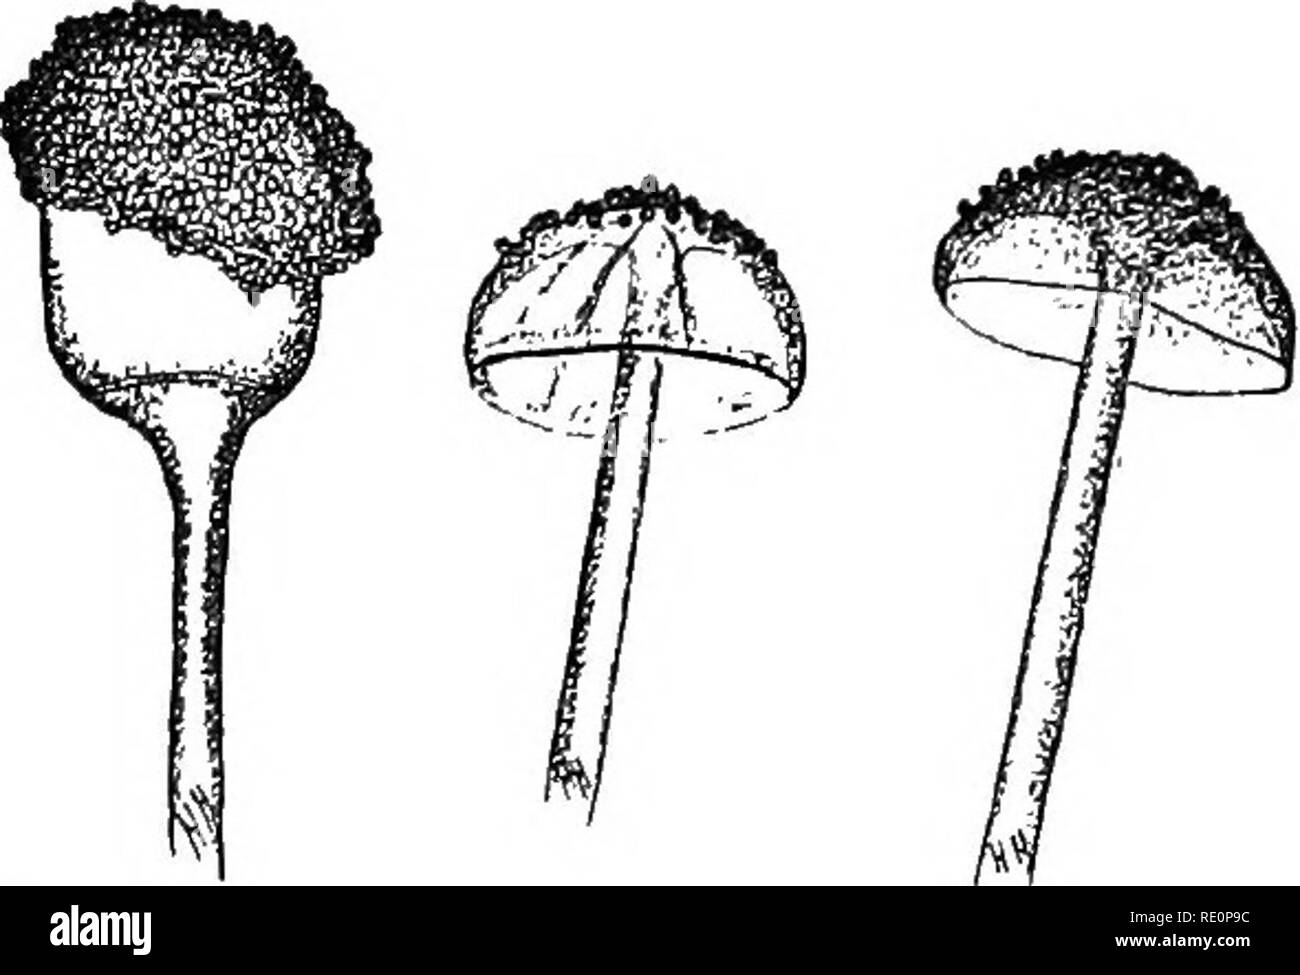 . Elementary botany. Botany. Fig. 133. A mucor (Rhizopus nigricans); at left nearly mature sporangium with columella showing within; in the middle is ruptured sporangium with some of the gonidia clinging to the colu- mella ; at right two ruptured sporangia with everted columella. capable of growing and forming the mycelium again, called chlamydospores. They are sometimes Water Moulds (Saprolegnia). 279. The water moulds are very interesting plants to study because they are so easy to obtain, and it is so easy to observe a type of gonidium here to which we have referred in our studies of the al Stock Photo